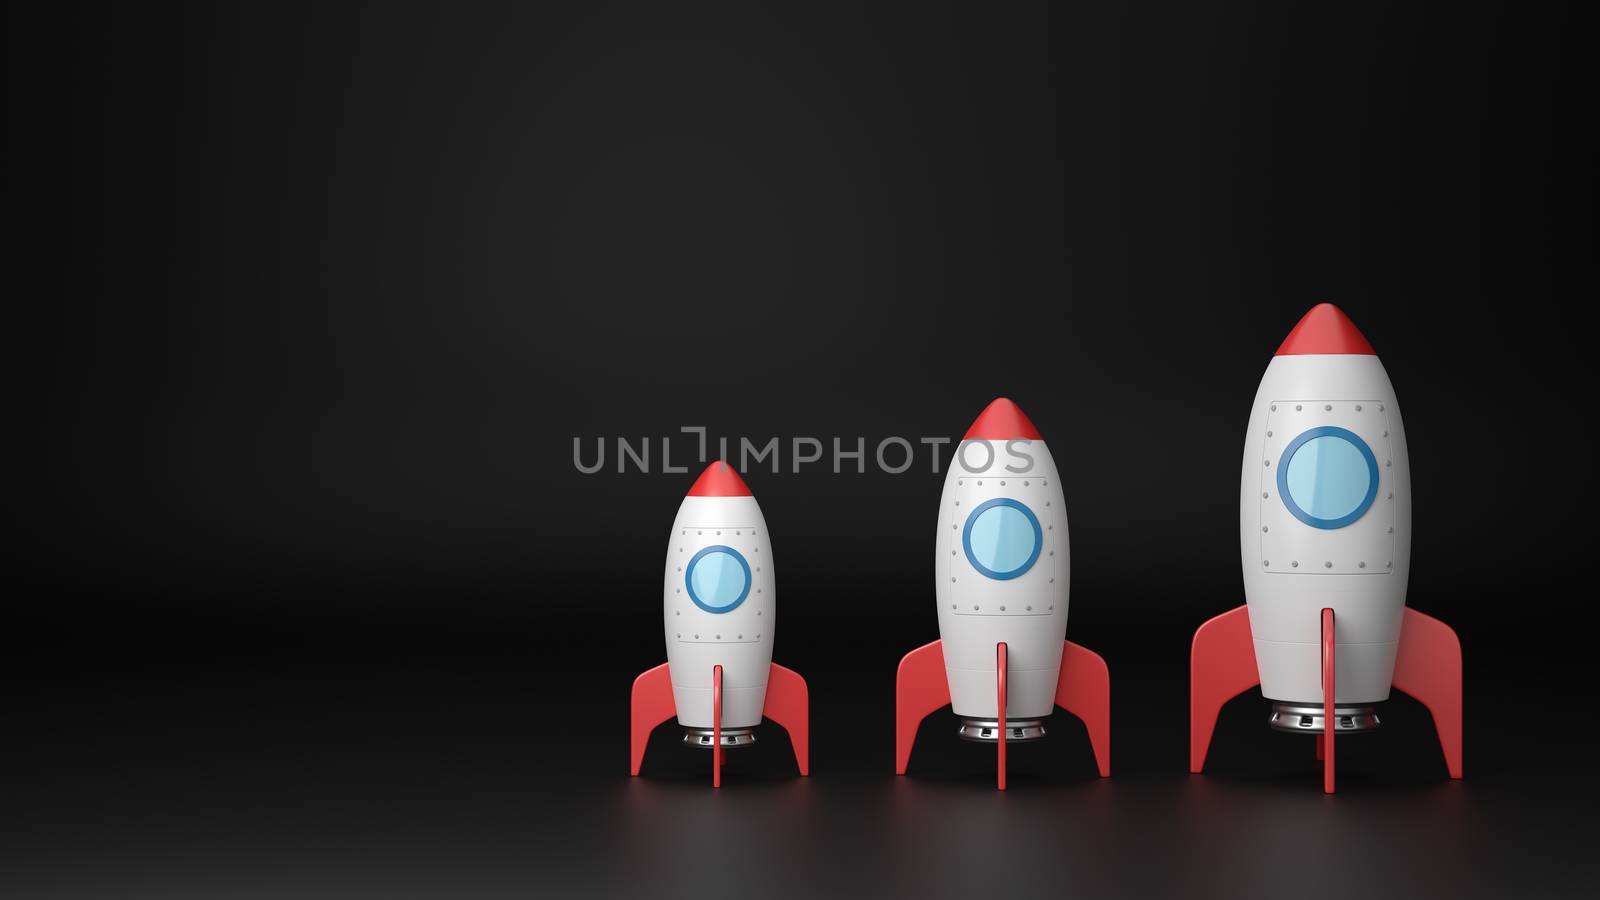 Set of Three Increasing Size Red and White Cartoon Spaceships on Dark Background with Copy Space 3D Illustration